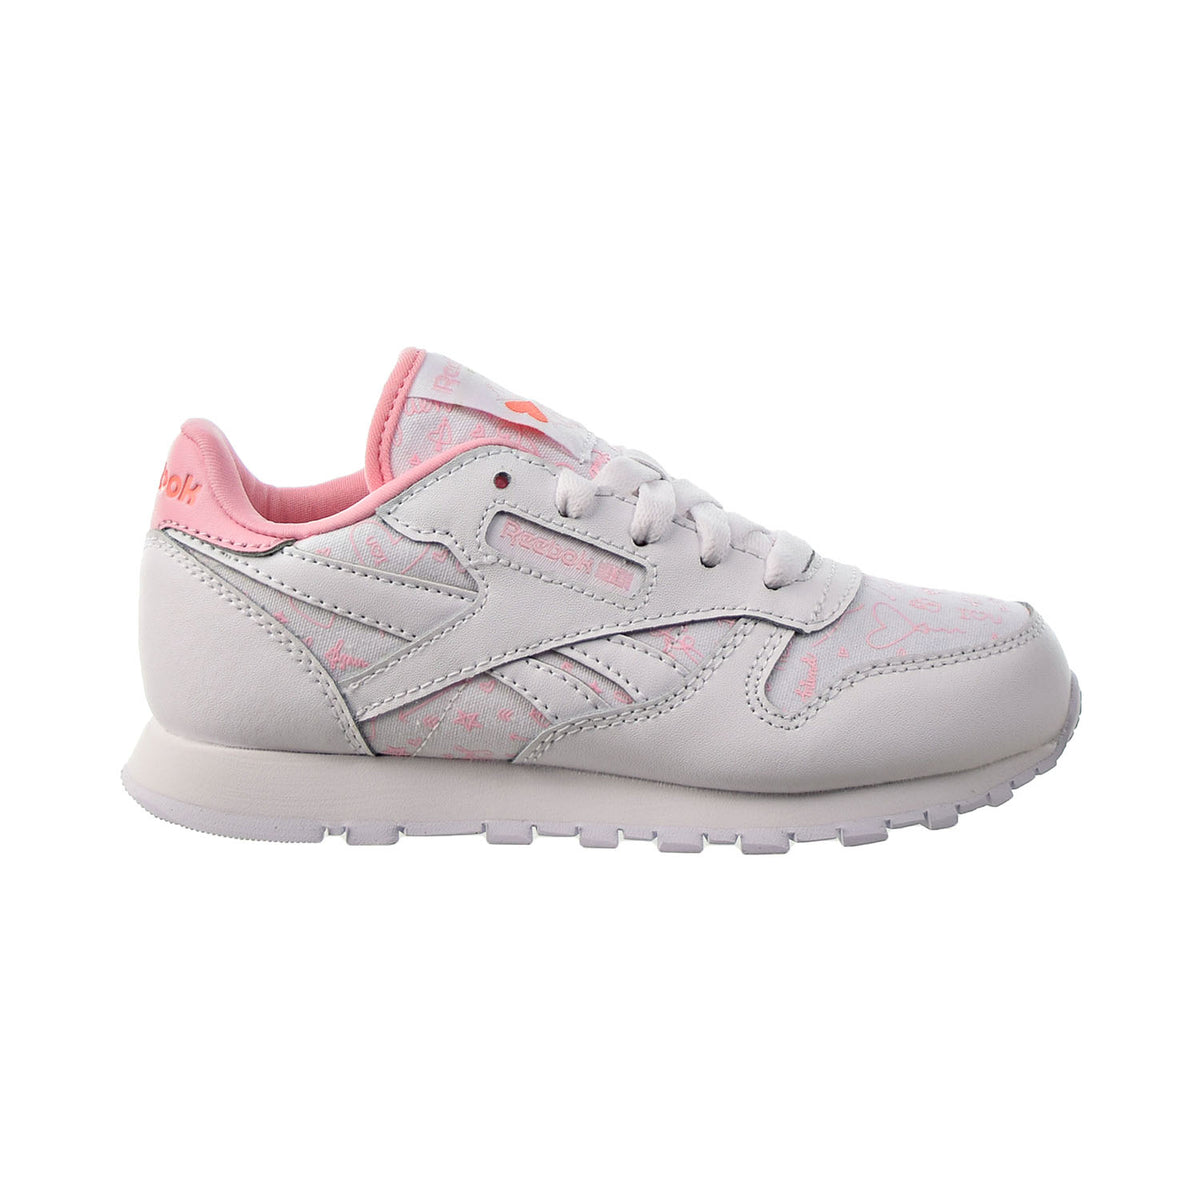 Orator afbrudt respekt Reebok Classic Leather Little Kids' Shoes White-Pink Glow-Twisted Cora